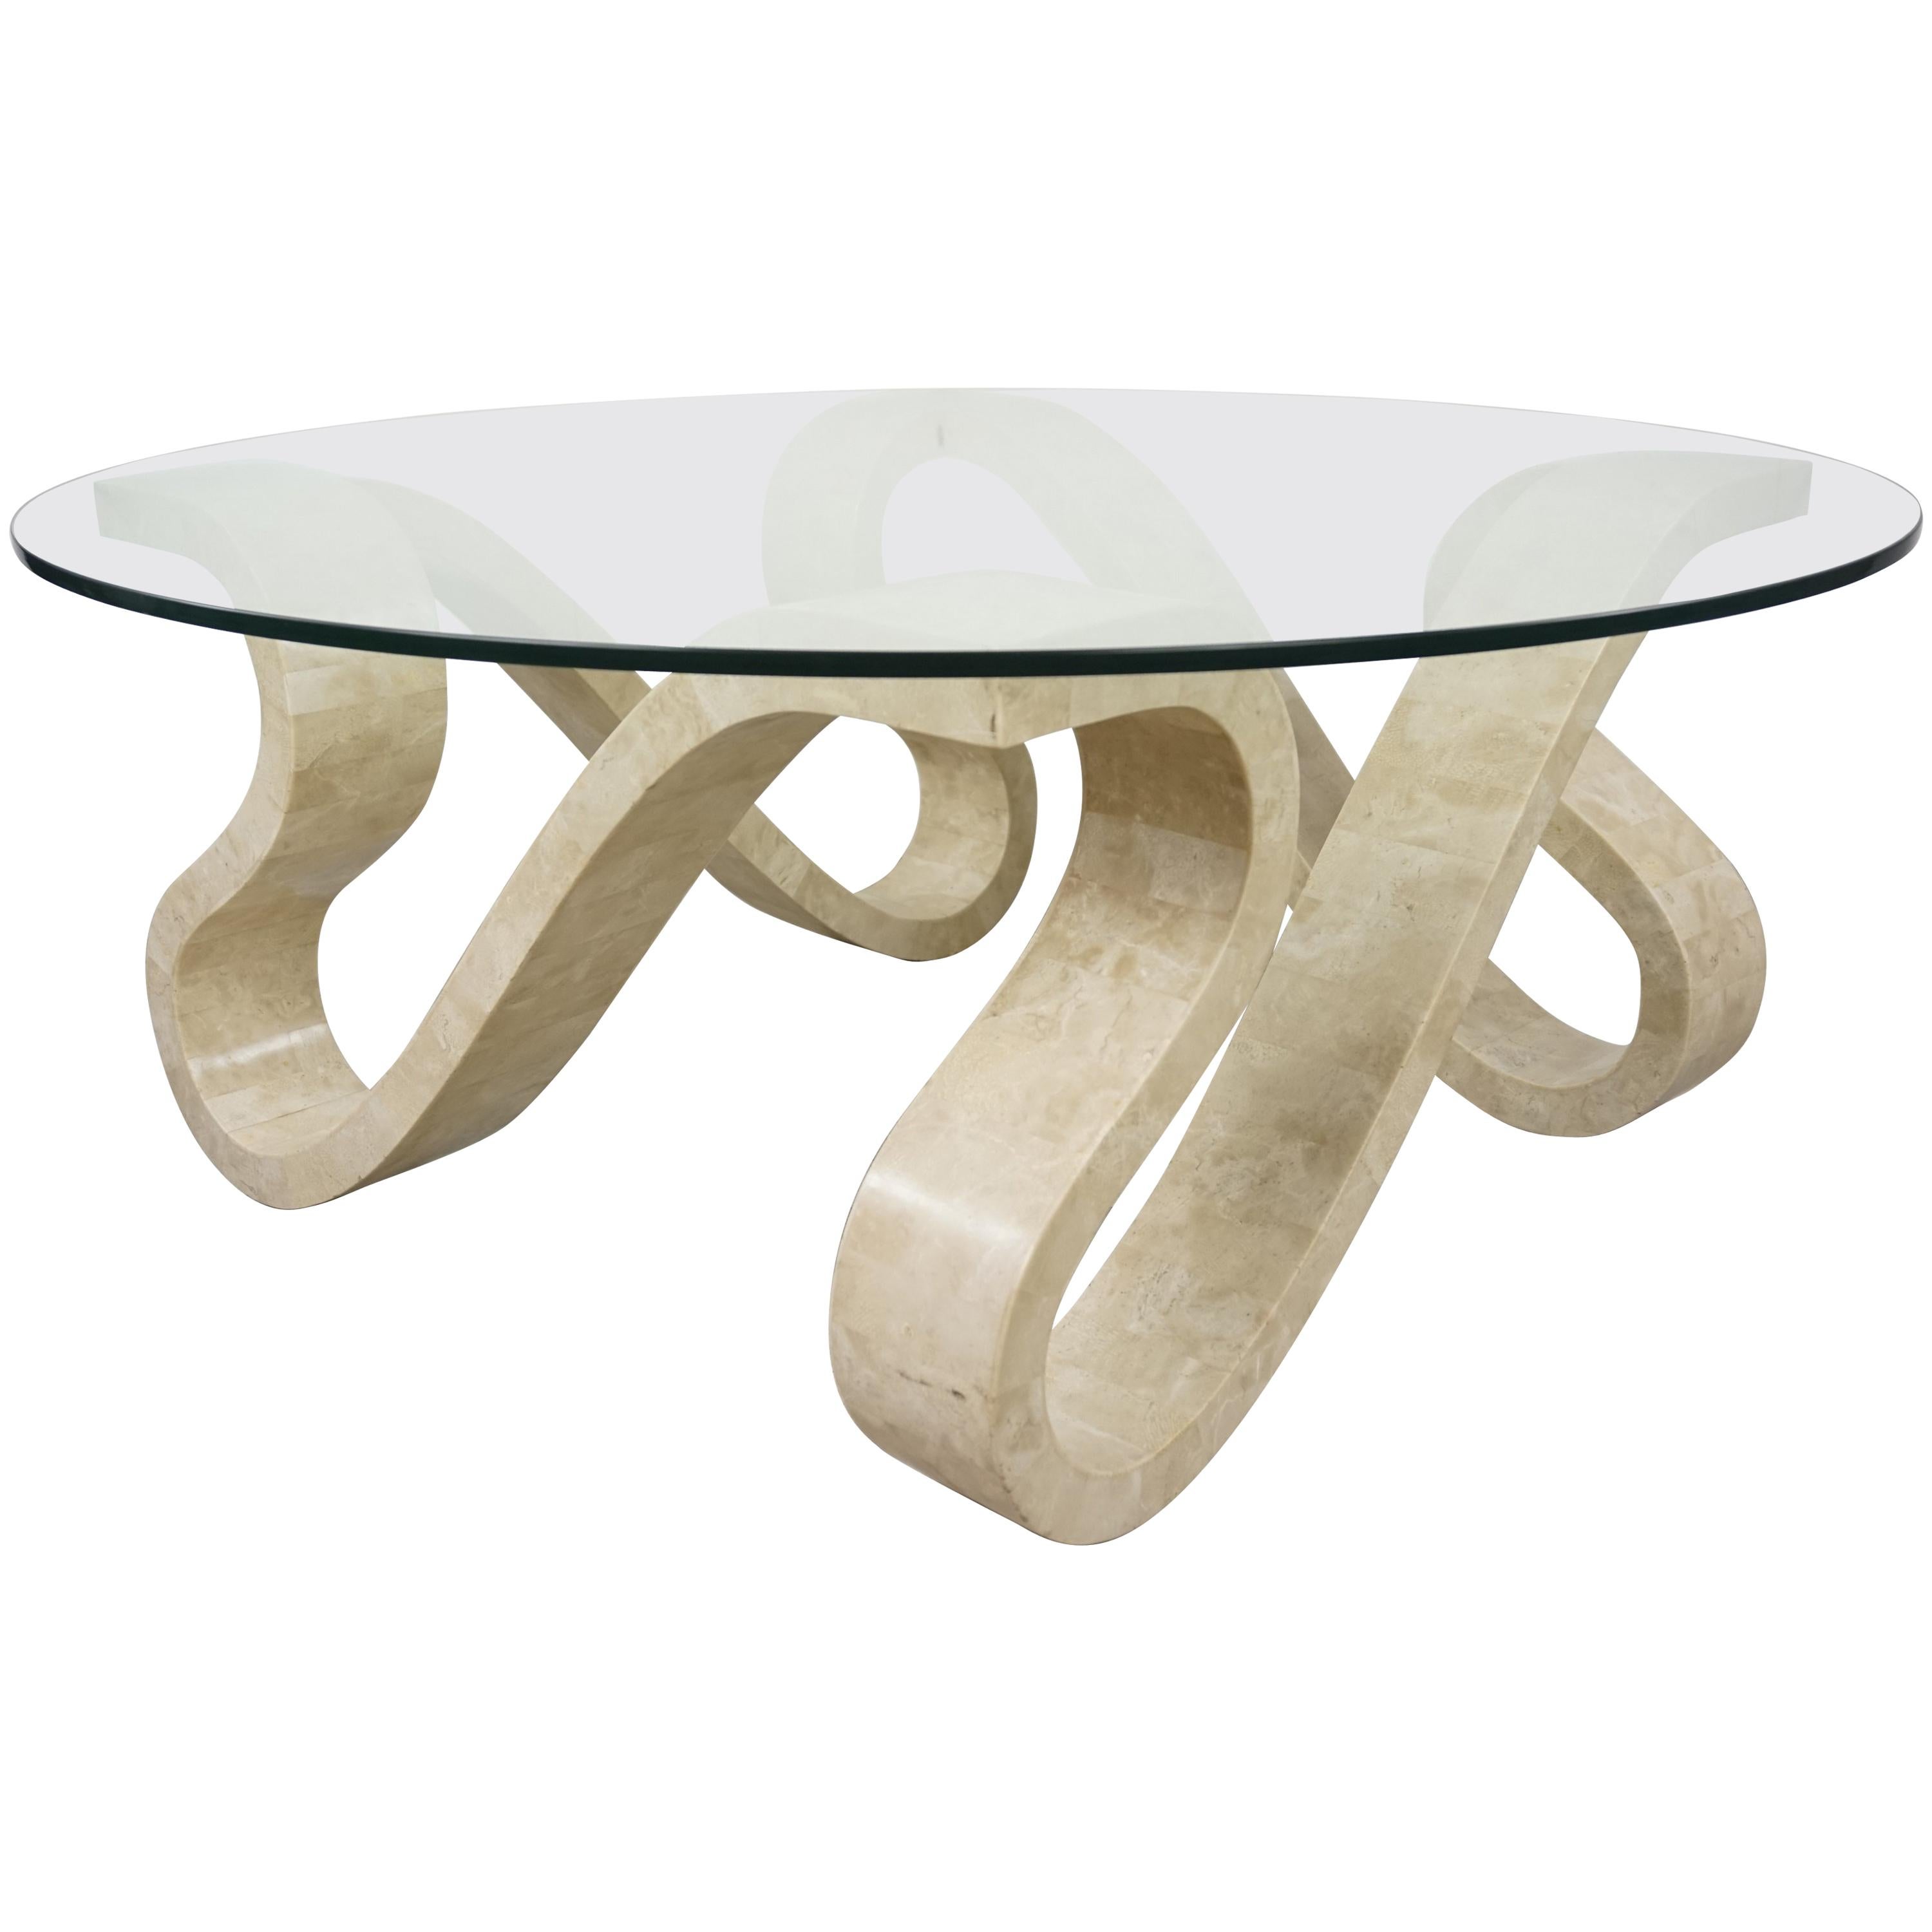 Tessellated Travertine Marquetry and Round Glass Tray Coffee Table